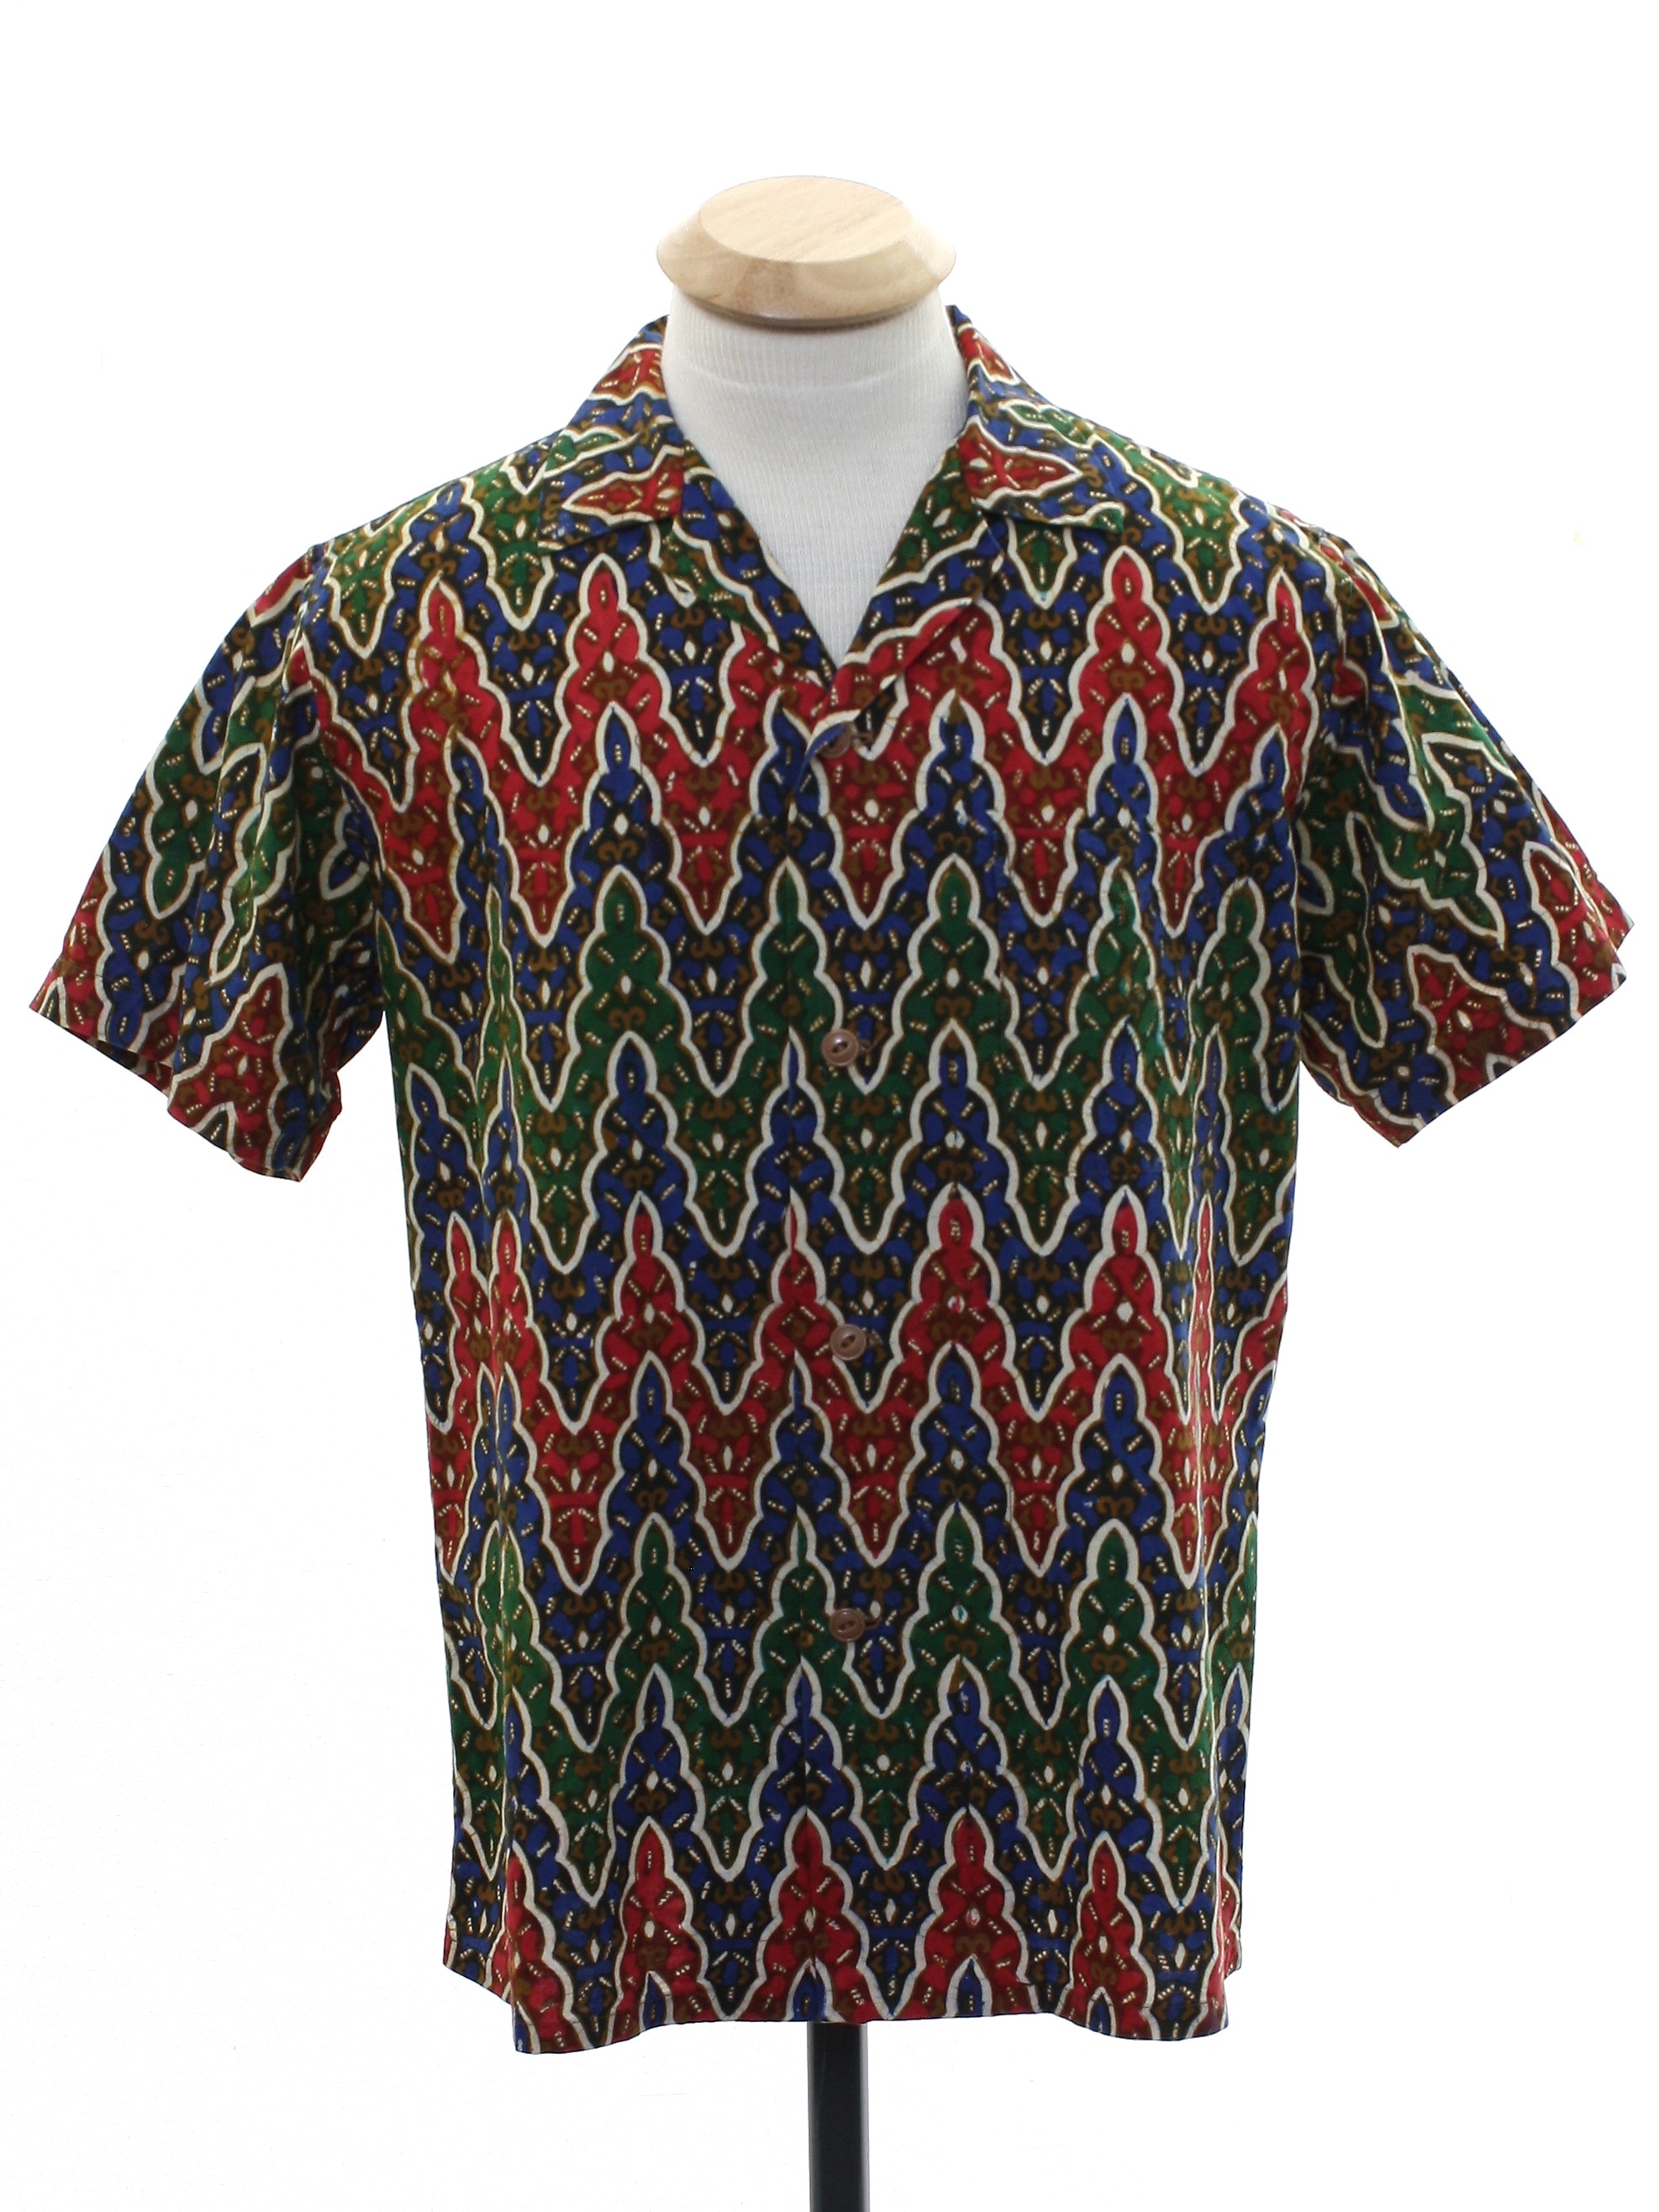 Retro 1970s Hippie Shirt: Late 70s or Early 80s -No Label- Mens multi ...